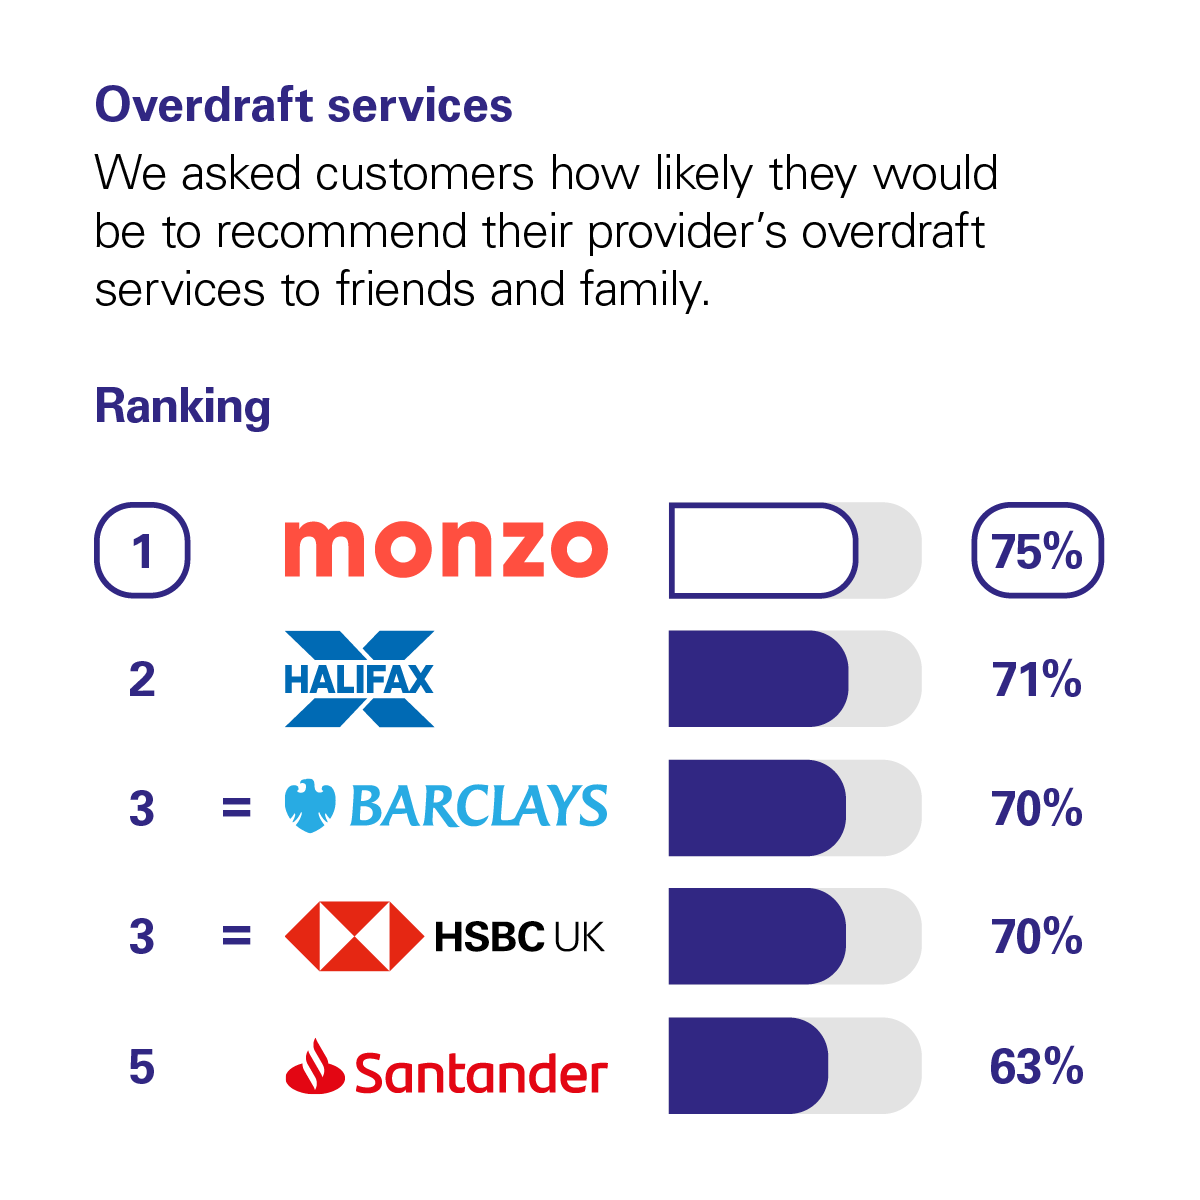 Graph showing the results of the CMA scoring of UK banks in the Overdraft Services category. The CMA asked customers how likely they would be to recommend their provider's overdraft services to friends and family. The rankings with percentage scores are: 1st Monzo with 75%. 2nd Halifax with 71%. Joint 3rd Barclays and HSBC UK with 70%. 5th Santander with 63%.